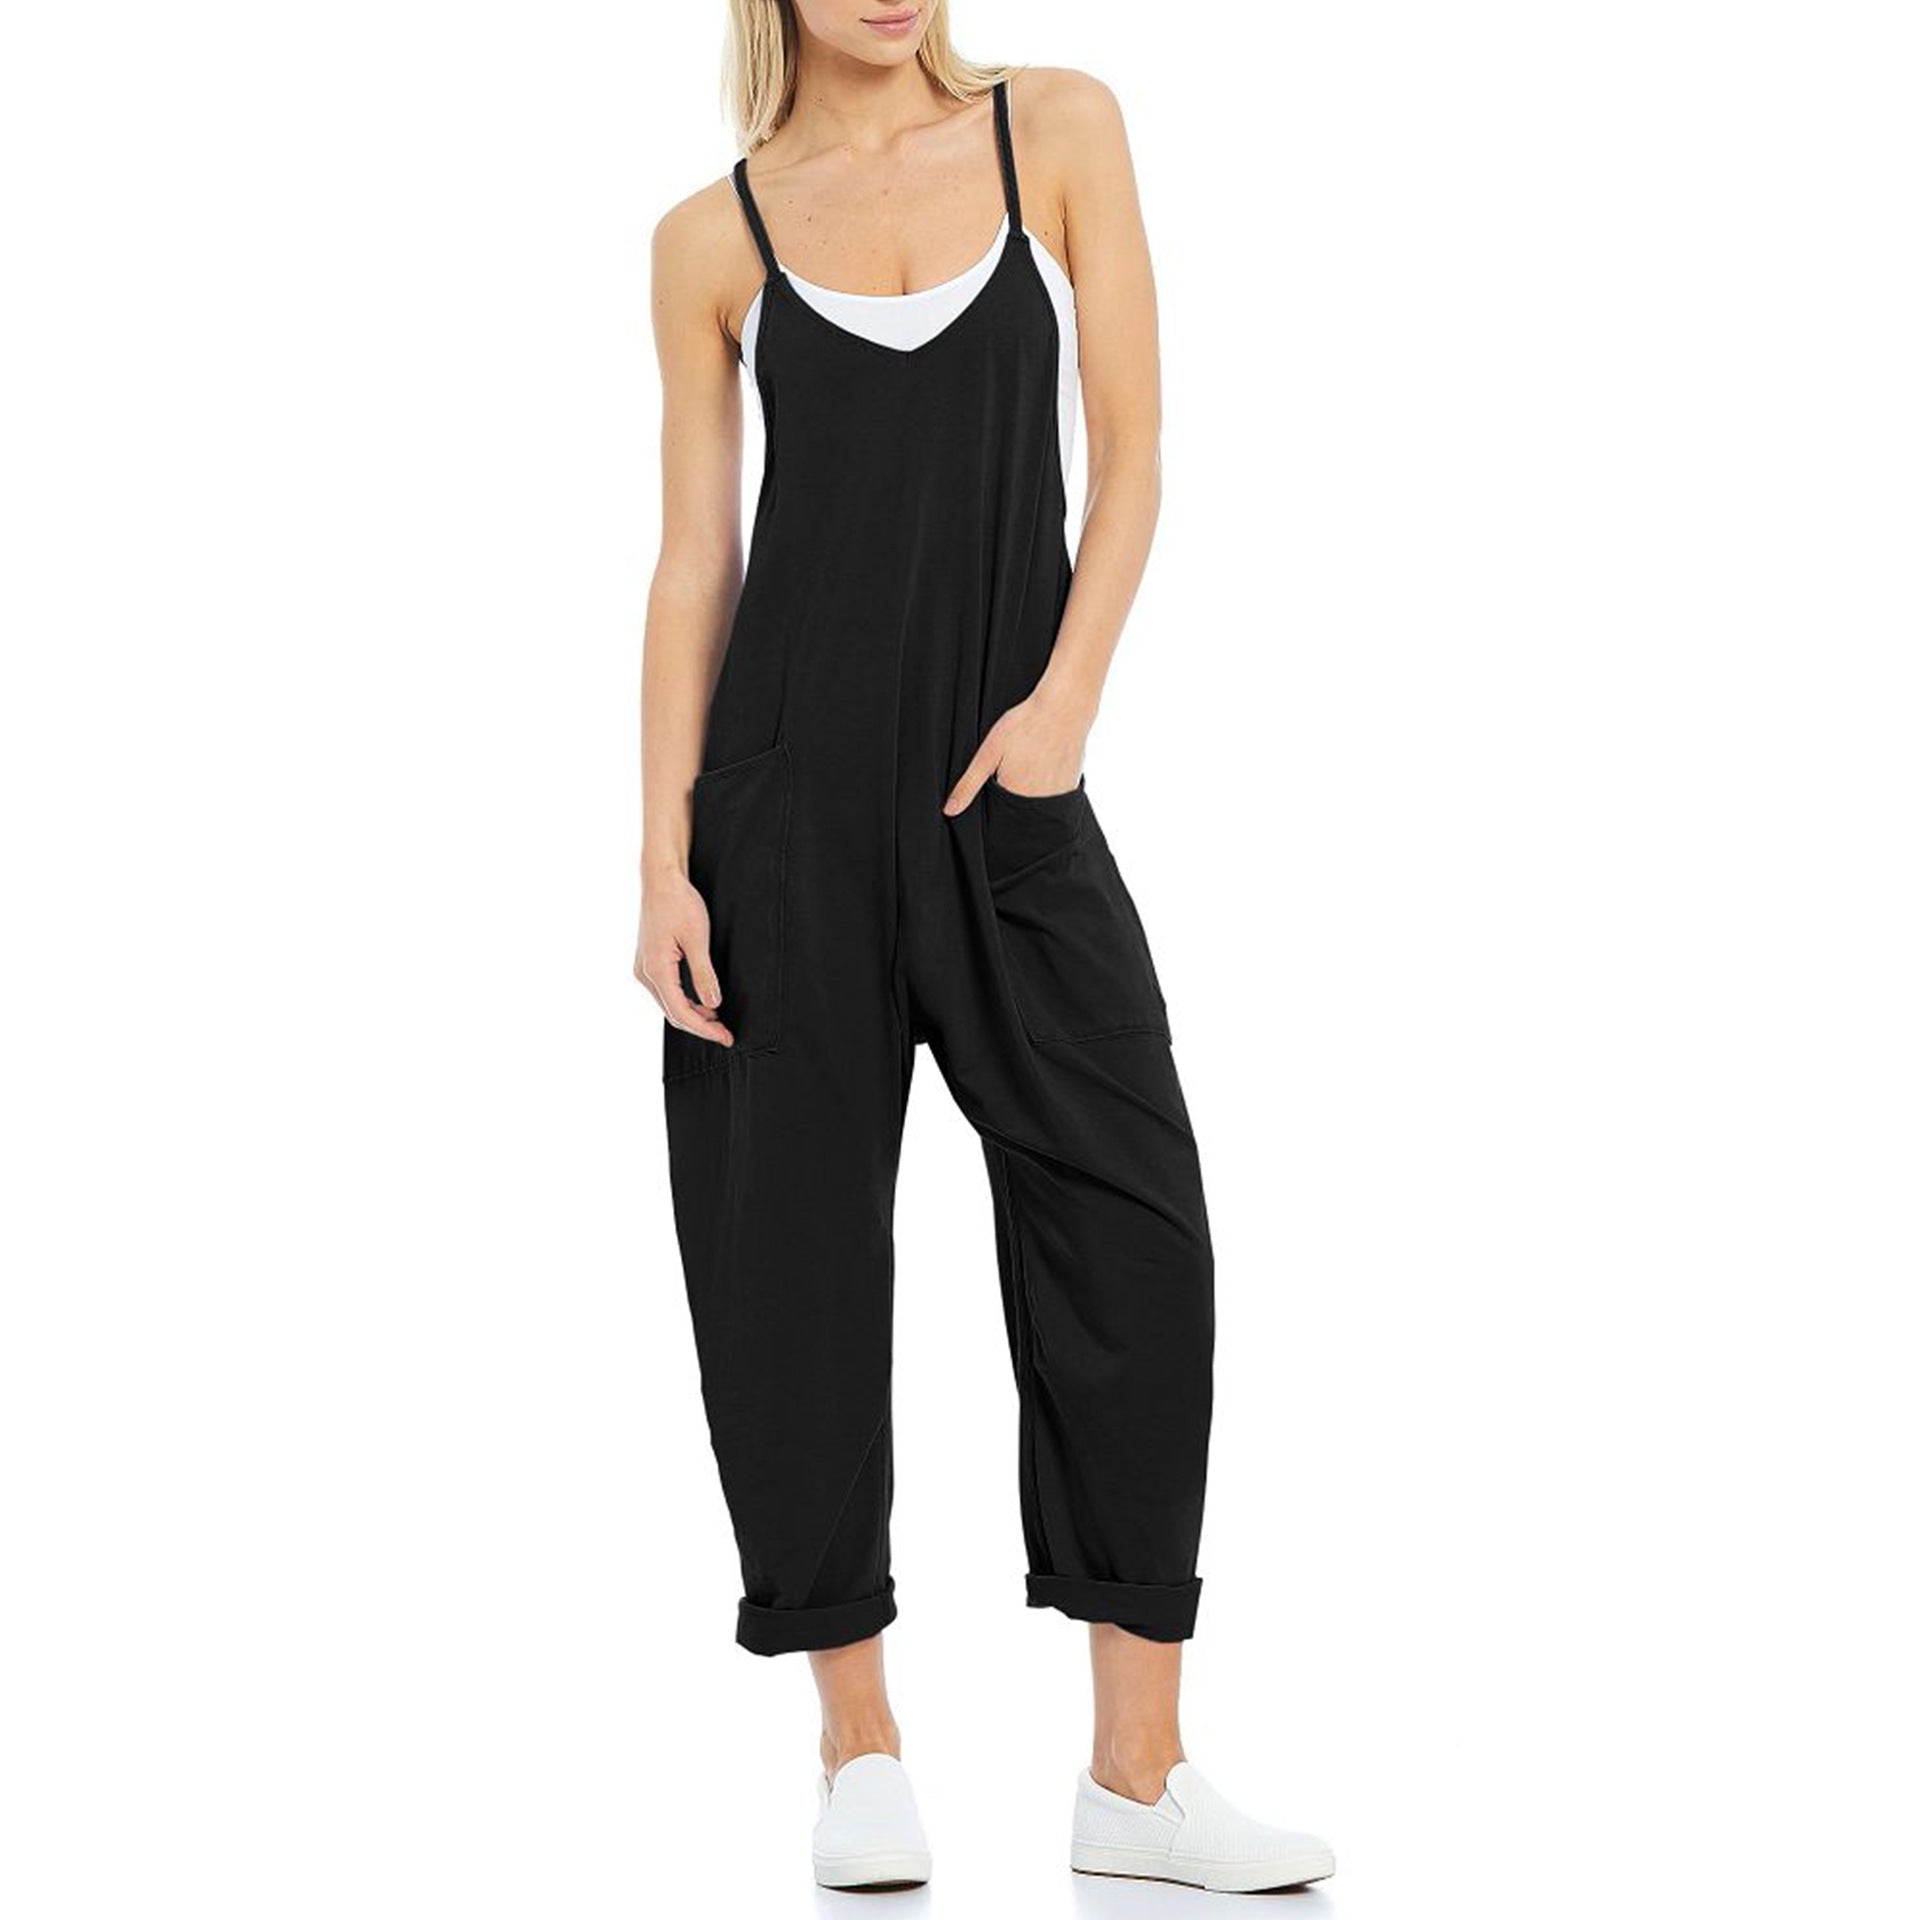 Women's Pocket Spaghetti Straps Knitted One-piece Trousers Jumpsuits